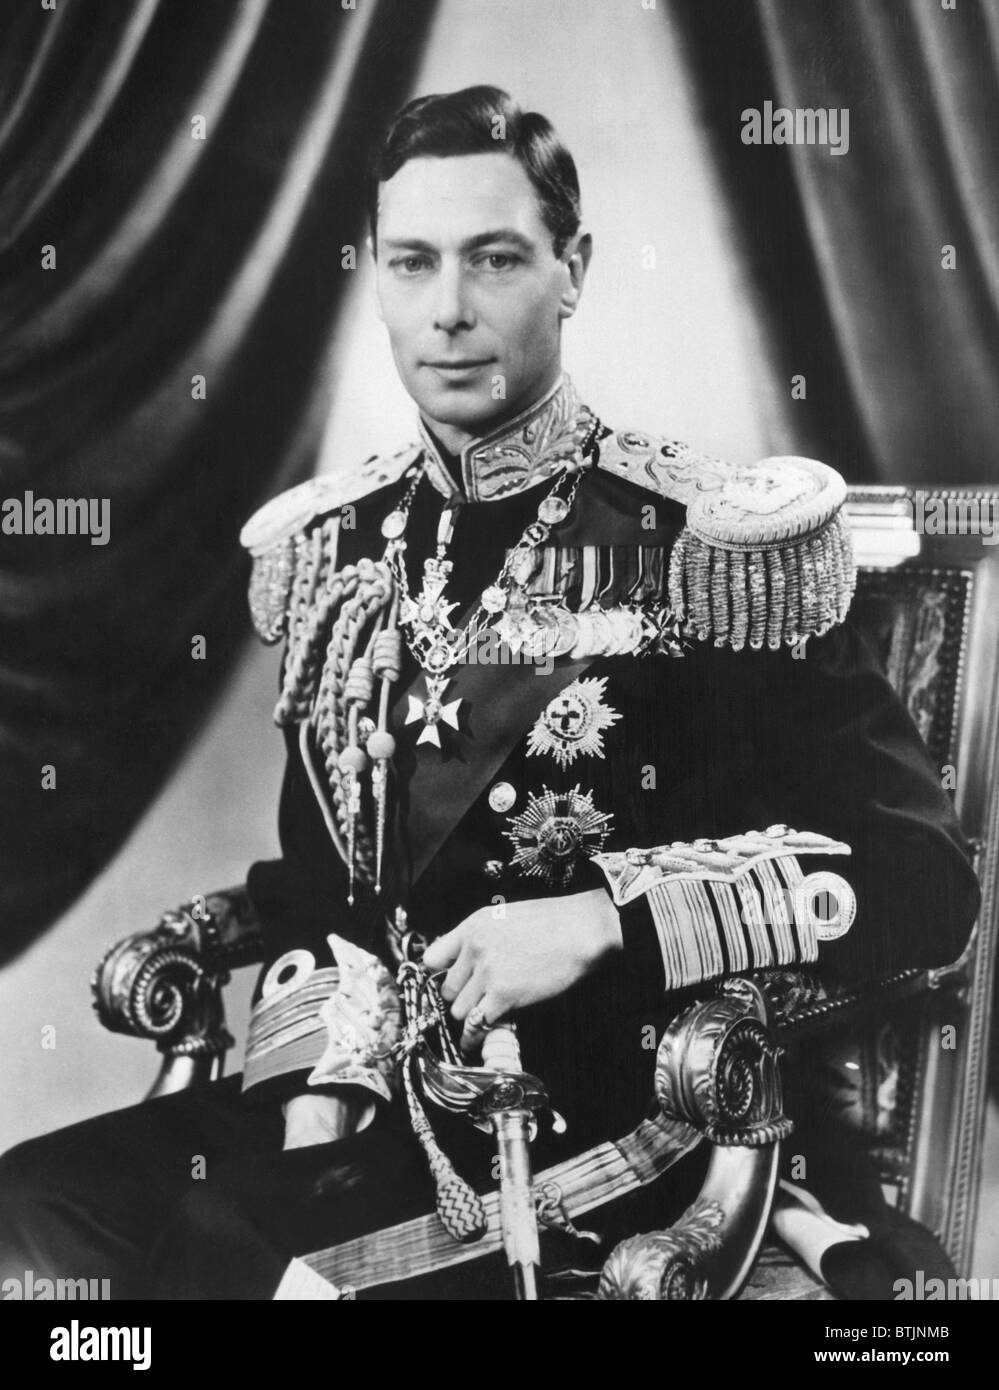 King George VI (1895-1952), King of the United Kingdom, May 3, 1937. Stock Photo